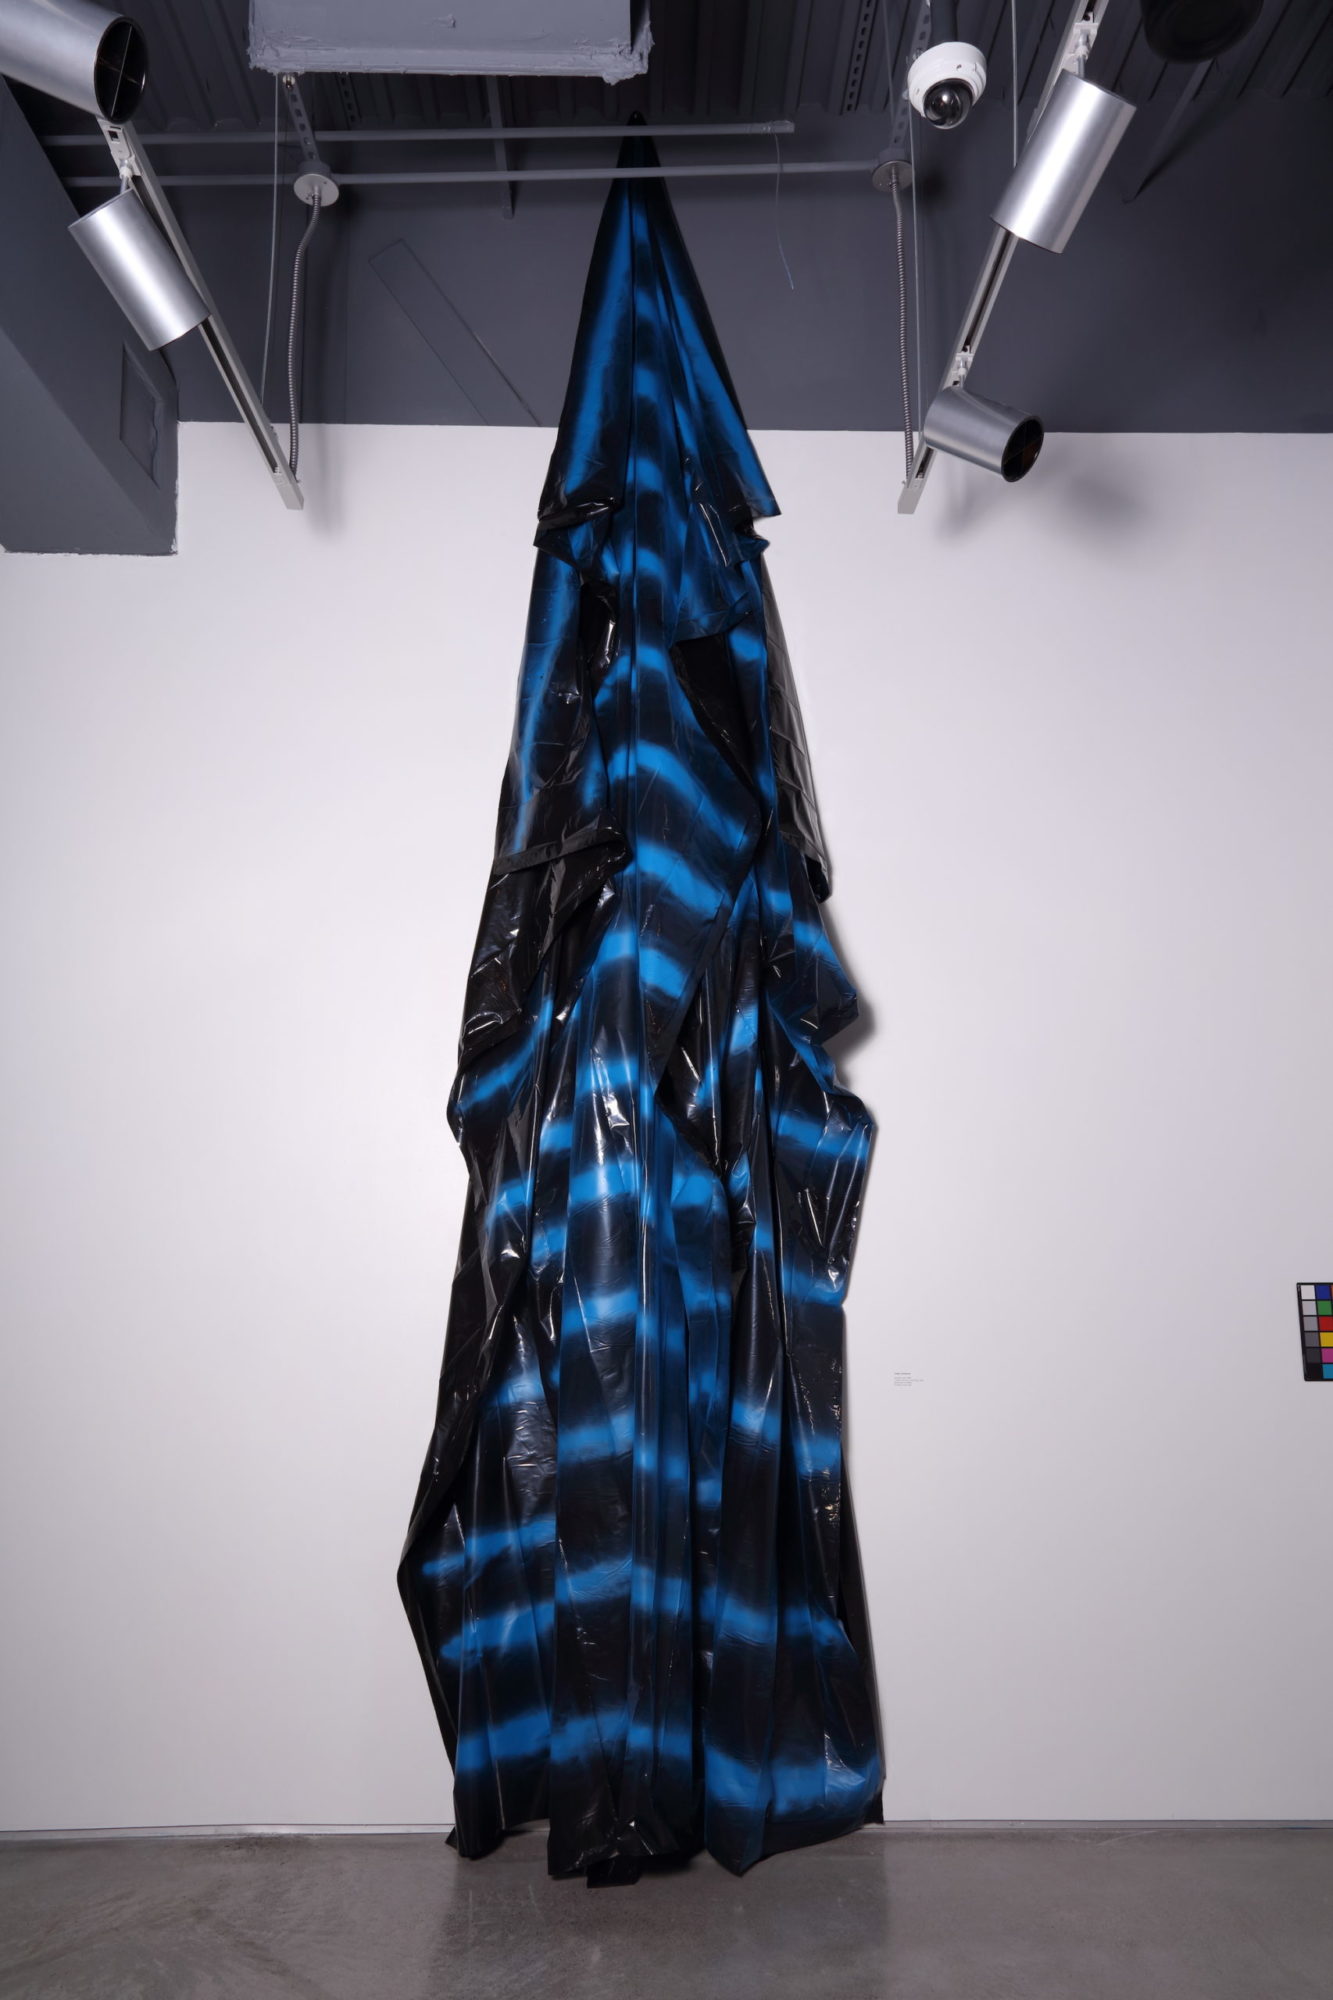 A large blue and black striped form rises vertically against a white wall